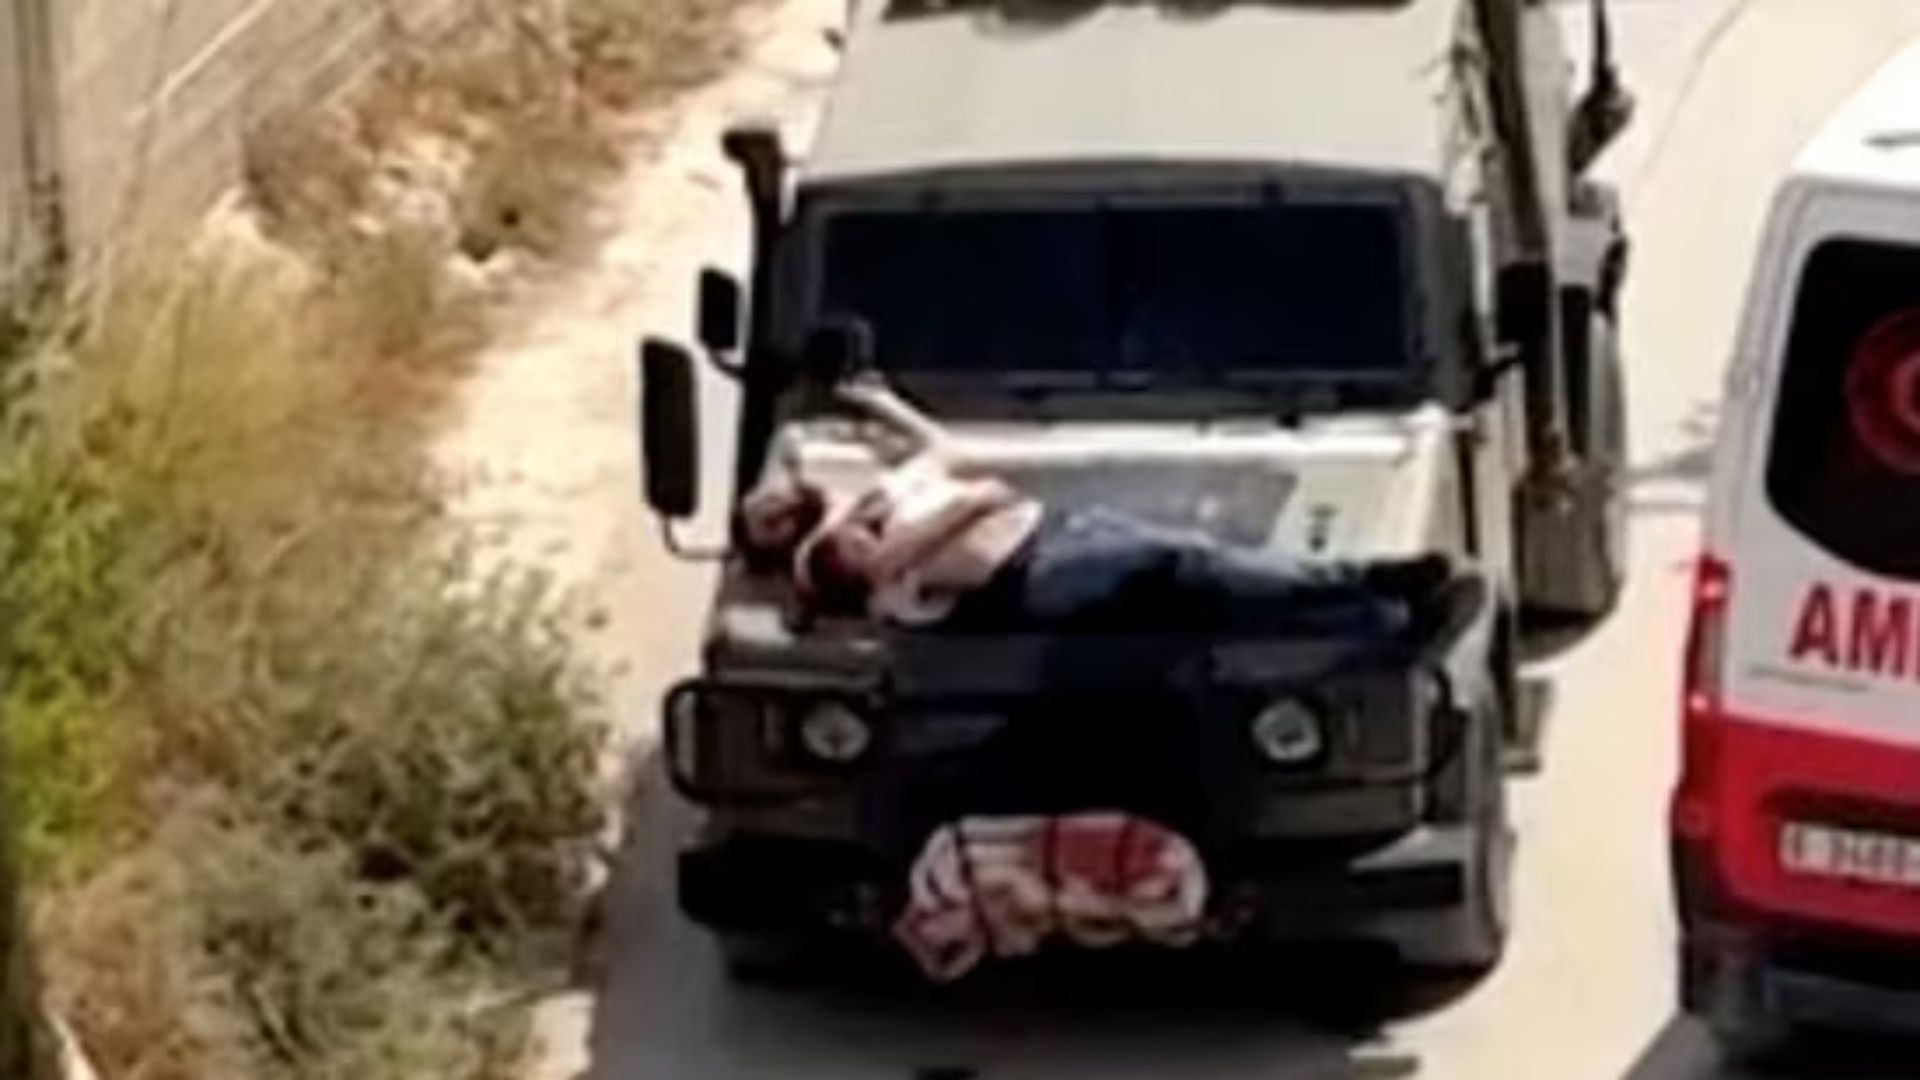 Video: Israeli Military Uses Wounded Palestinian Man As Human Shield